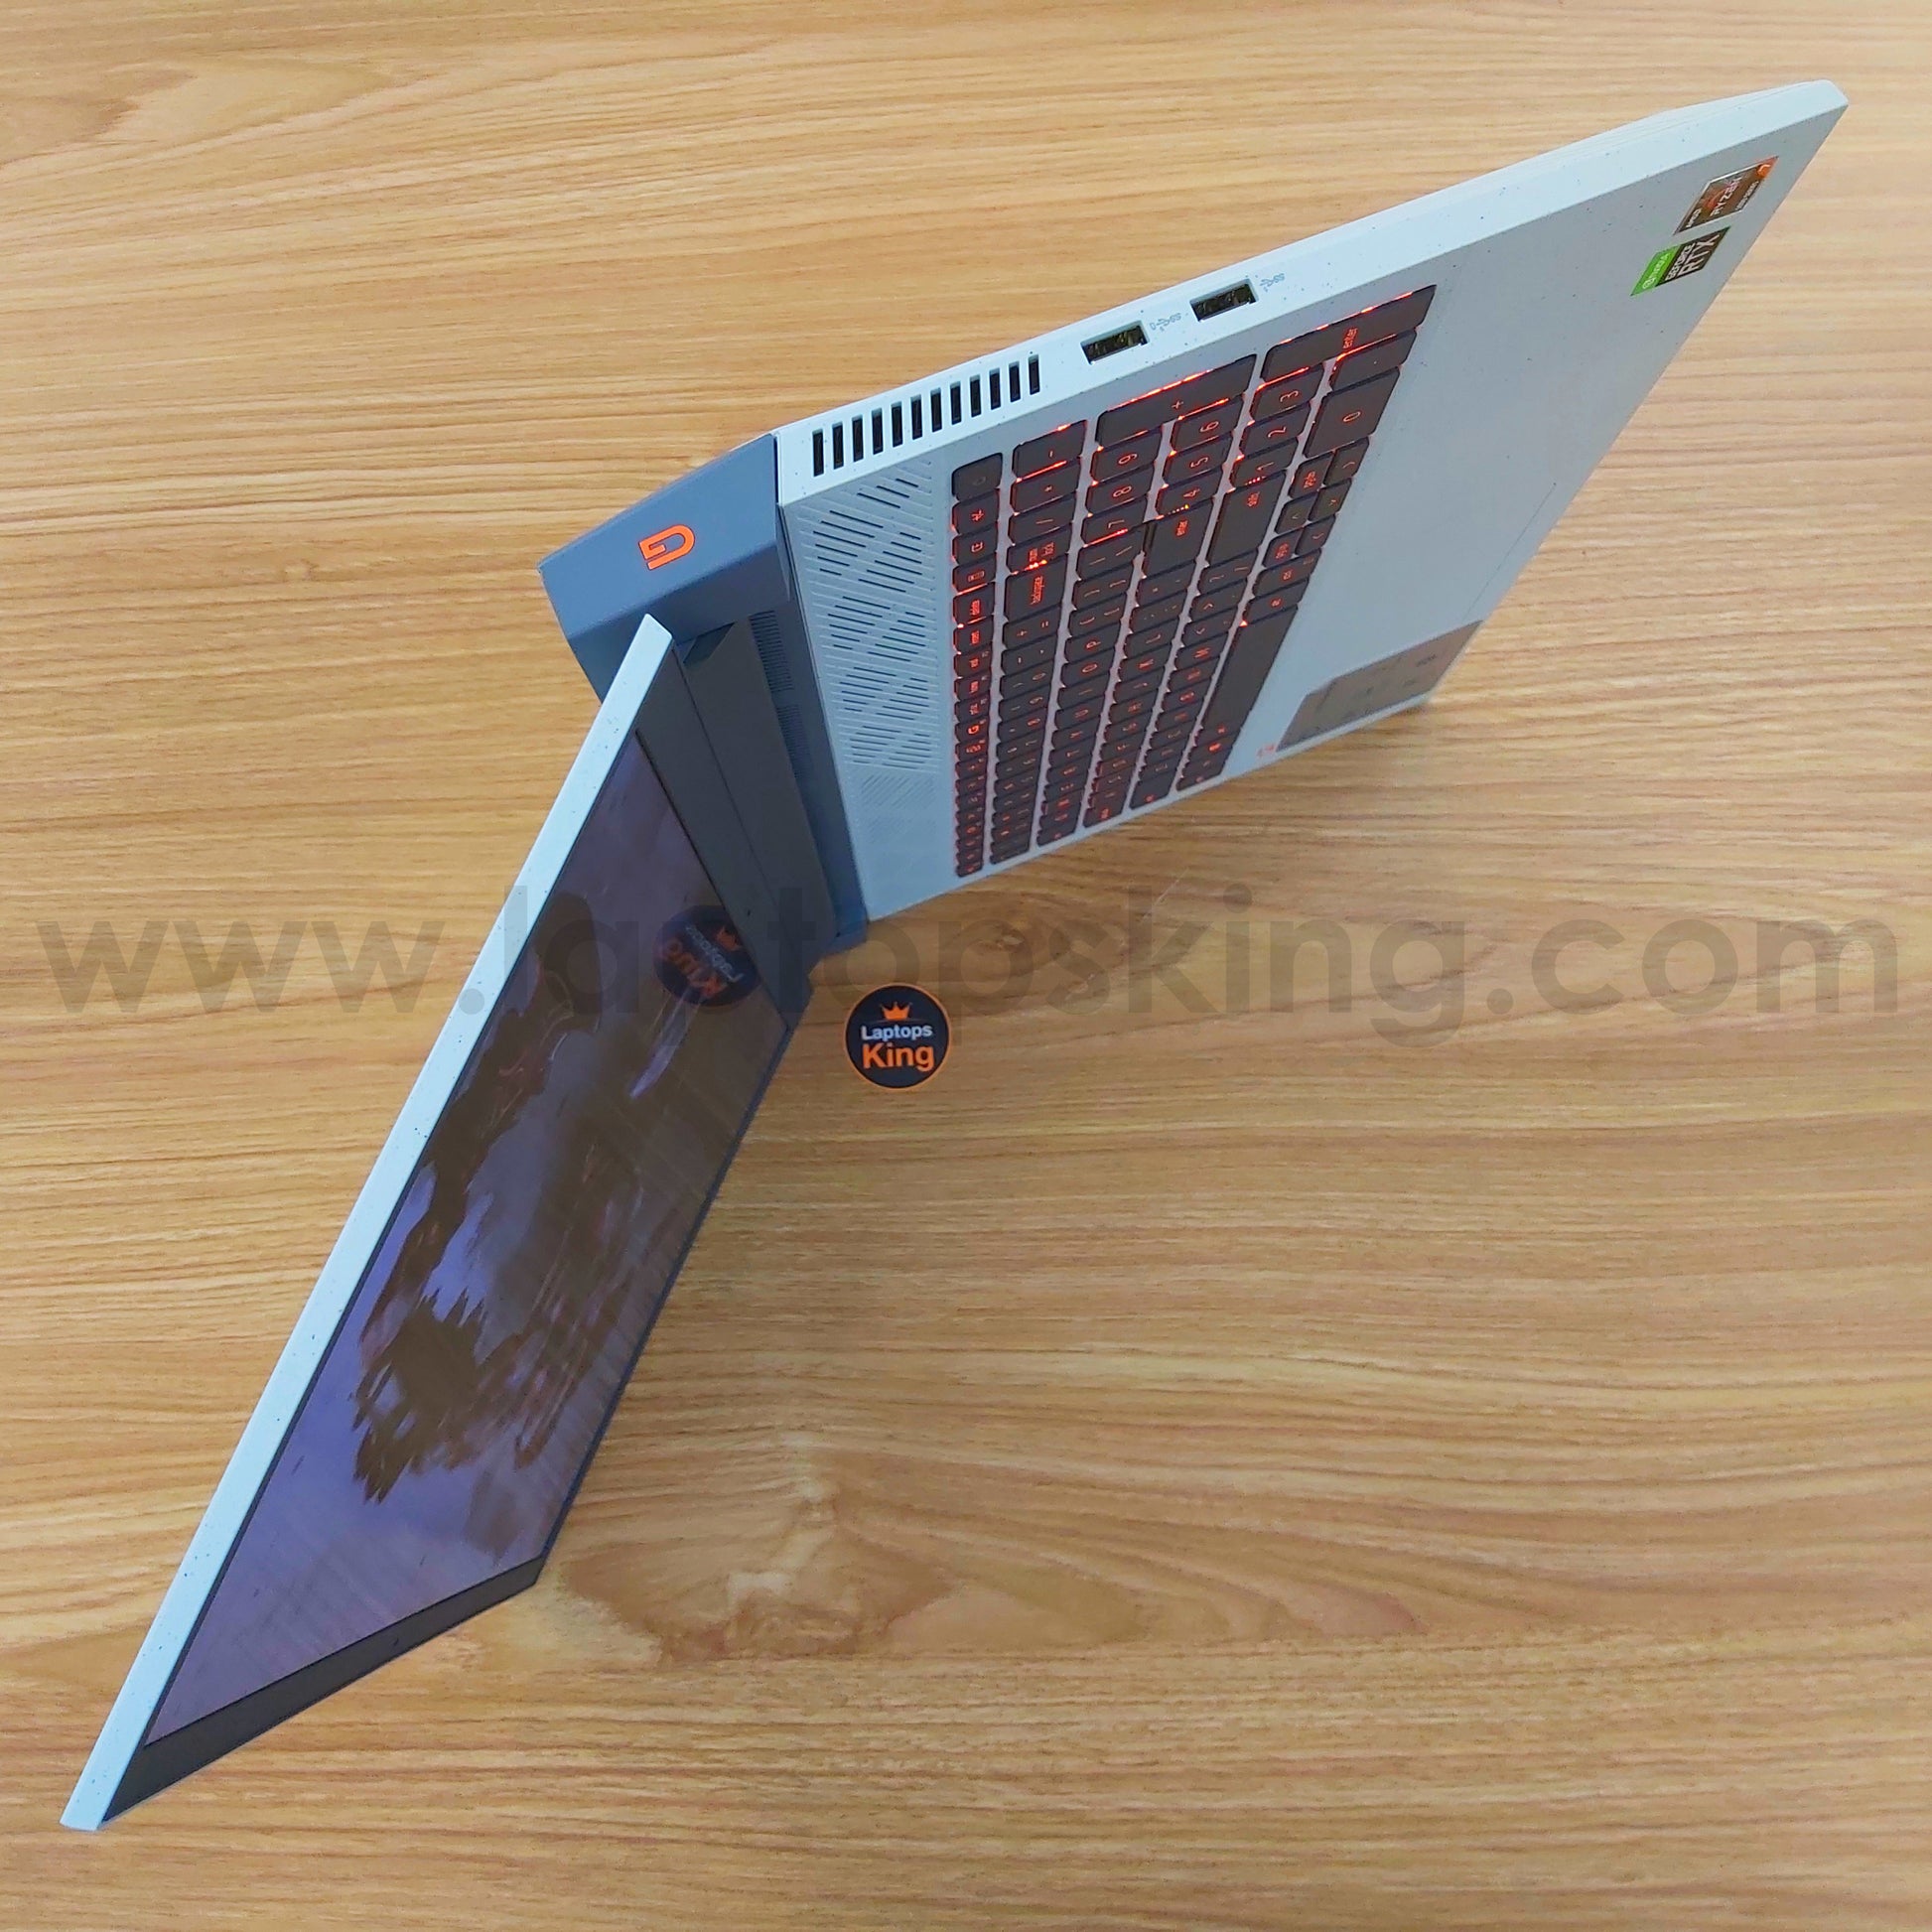 Dell G15 5515 Ryzen 7 5800h Rtx 3060 165hz Gaming Laptop Offers (New Open Box) Gaming laptop, Graphic Design laptop, best laptop for gaming, Best laptop for graphic design, computer for sale Lebanon, laptop for video editing in Lebanon, laptop for sale Lebanon, Best graphic design laptop,	Best video editing laptop, Best programming laptop, laptop for sale in Lebanon, laptops for sale in Lebanon, laptop for sale in Lebanon, buy computer Lebanon, buy laptop Lebanon.